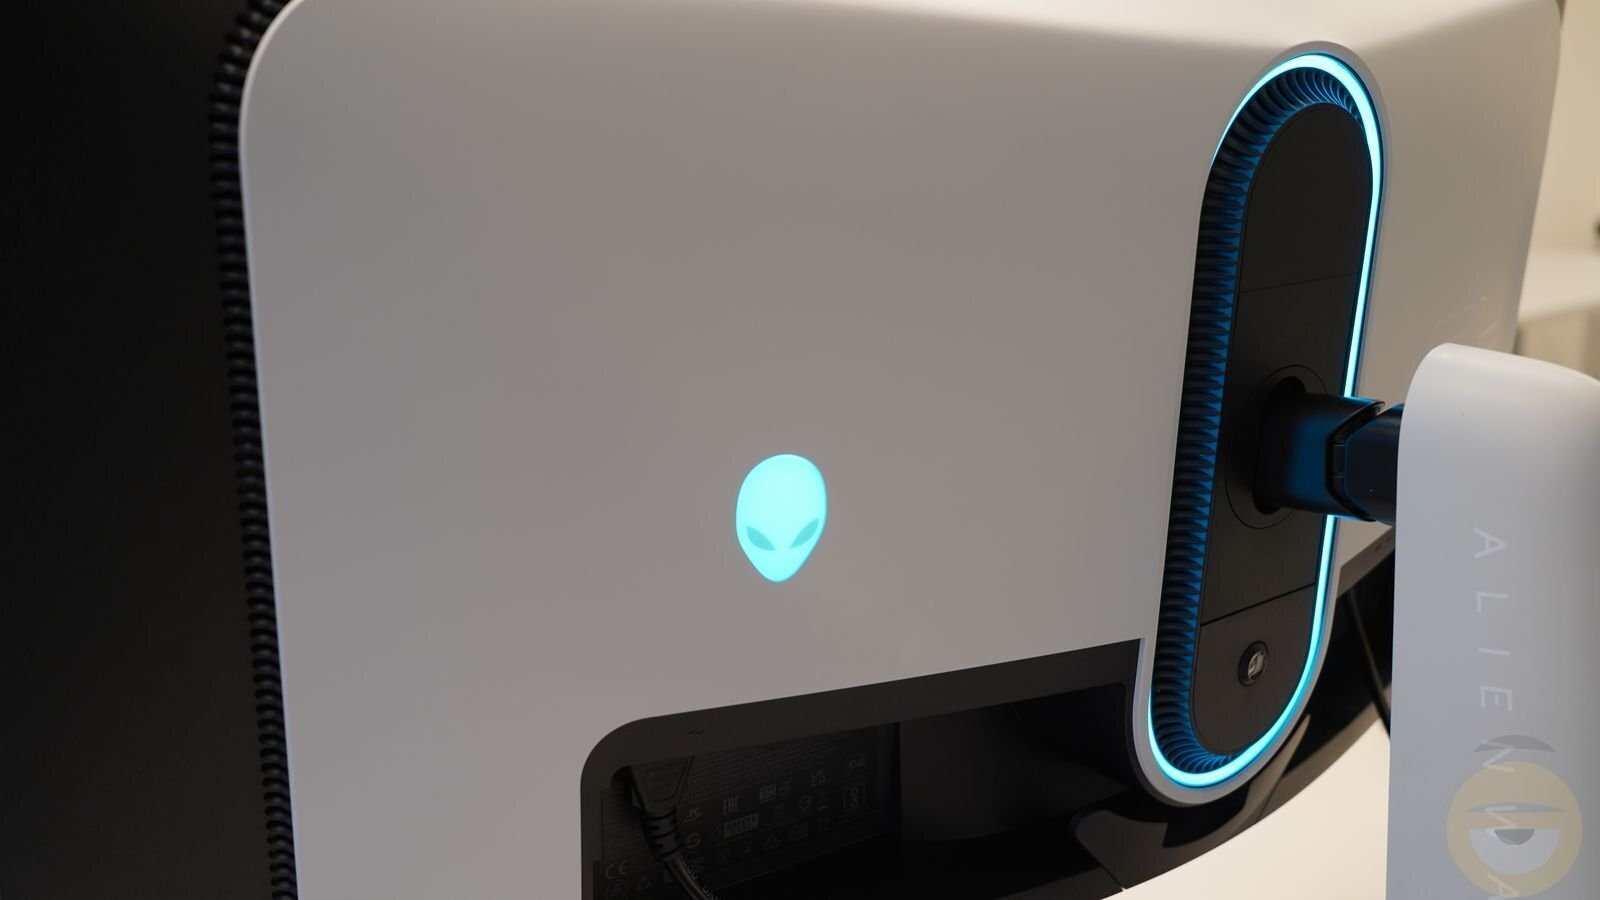 Alienware – Dell is preparing two new QD-OLED displays